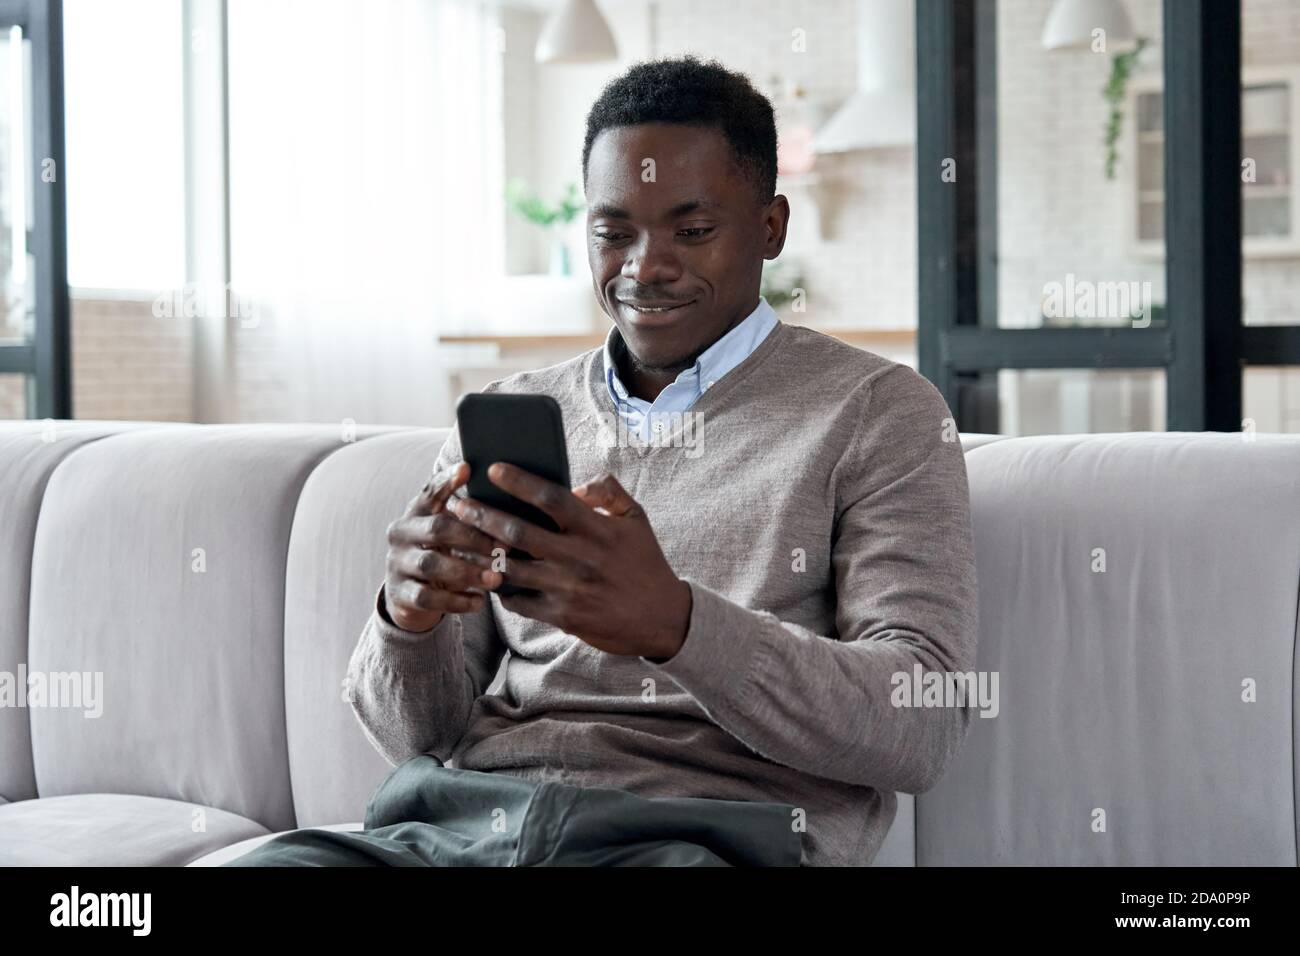 African american man using mobile apps sitting on couch at home. Stock Photo